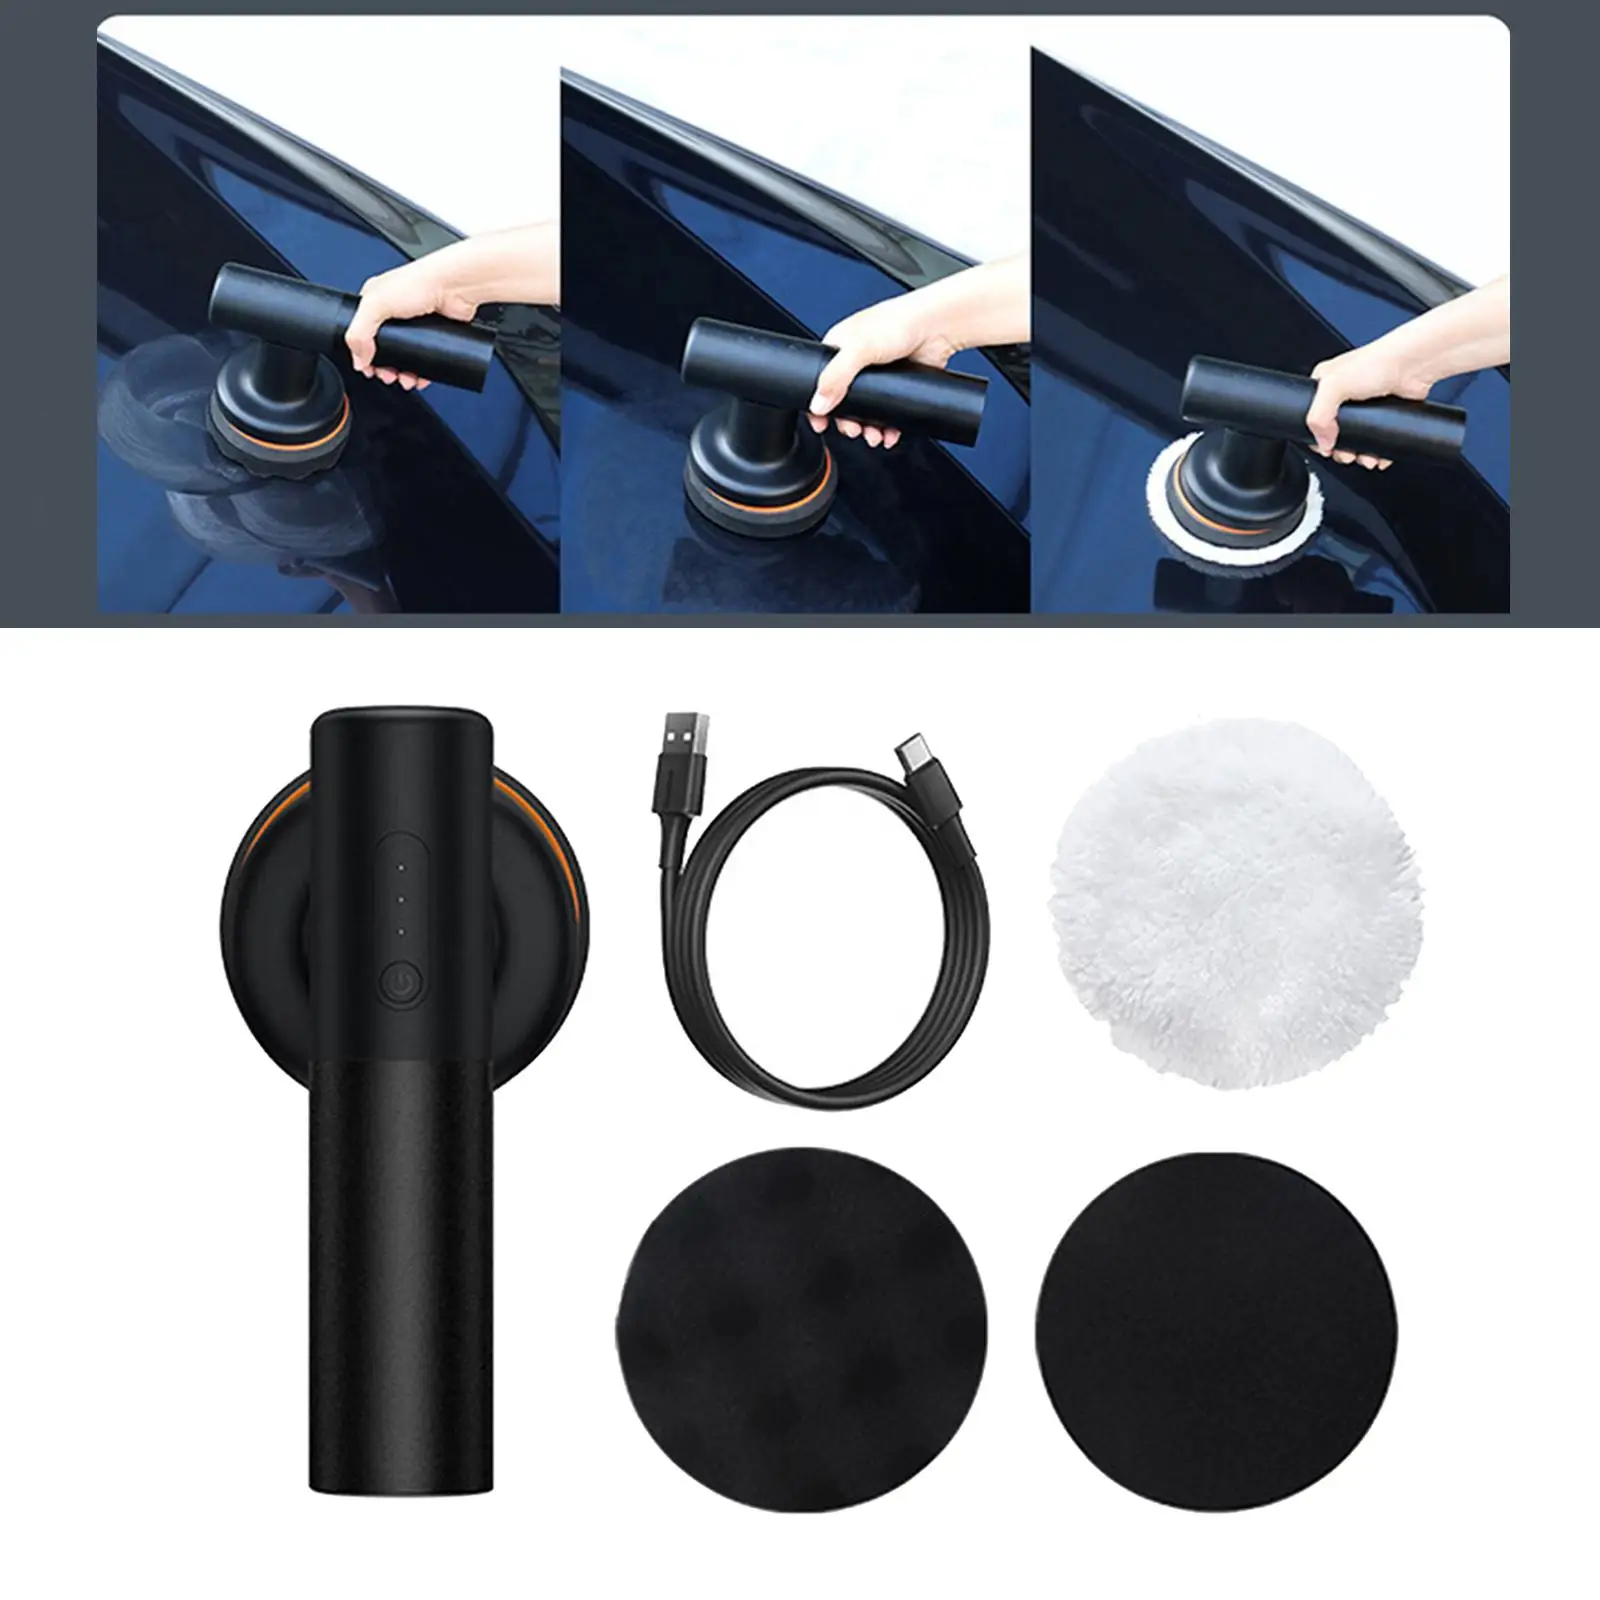  auto Polisher W/ Pad Rechargeable Portable  Start Polishing  45 Polisher Fit for Waxing Machine Sander